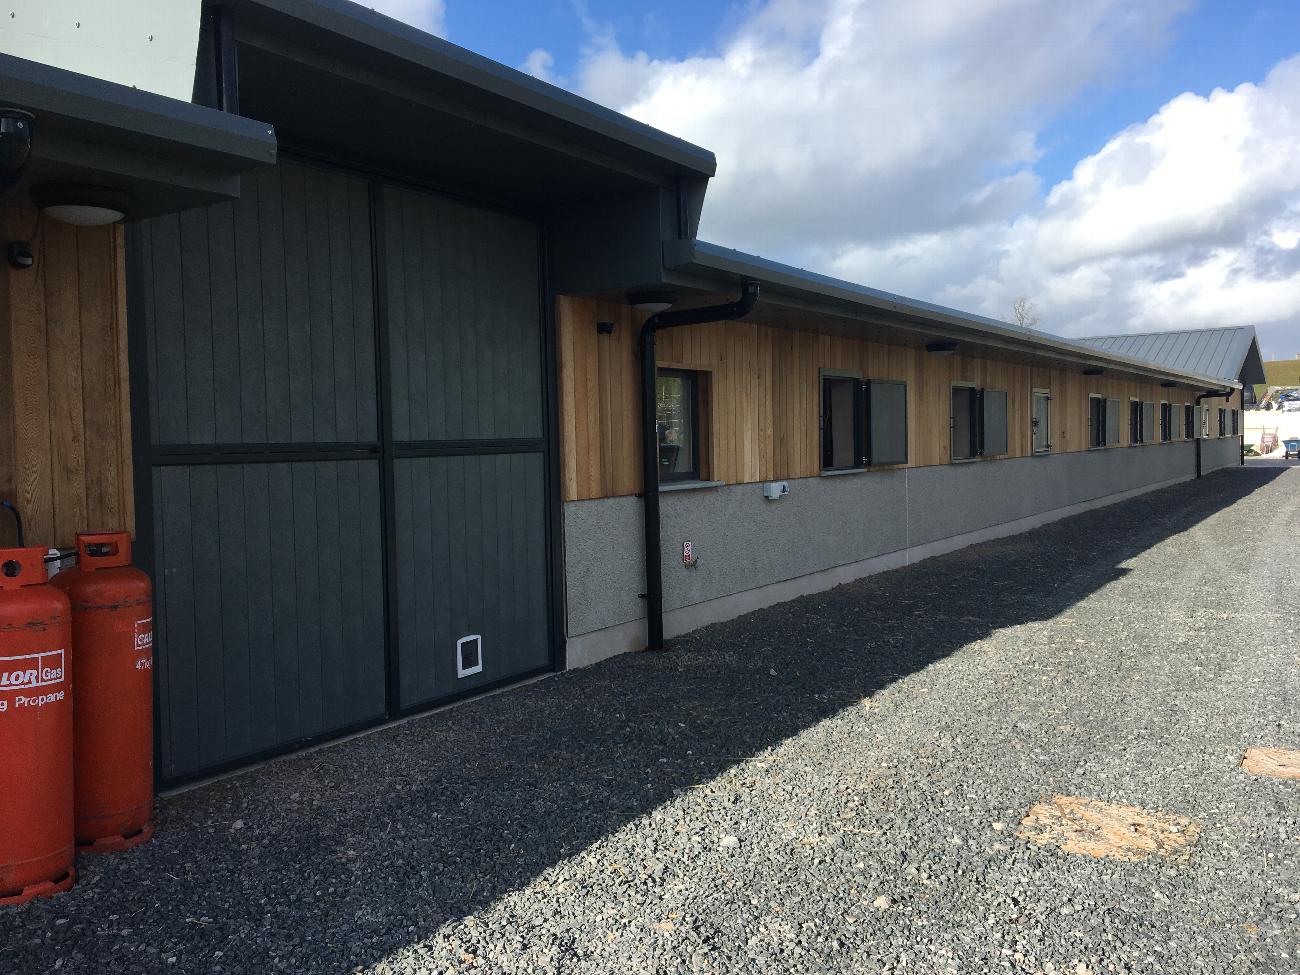 Windows and Doors | equestrian stables, field shelters, equine accessories, arena and menage company in Blackburn and Lancashire gallery image 15